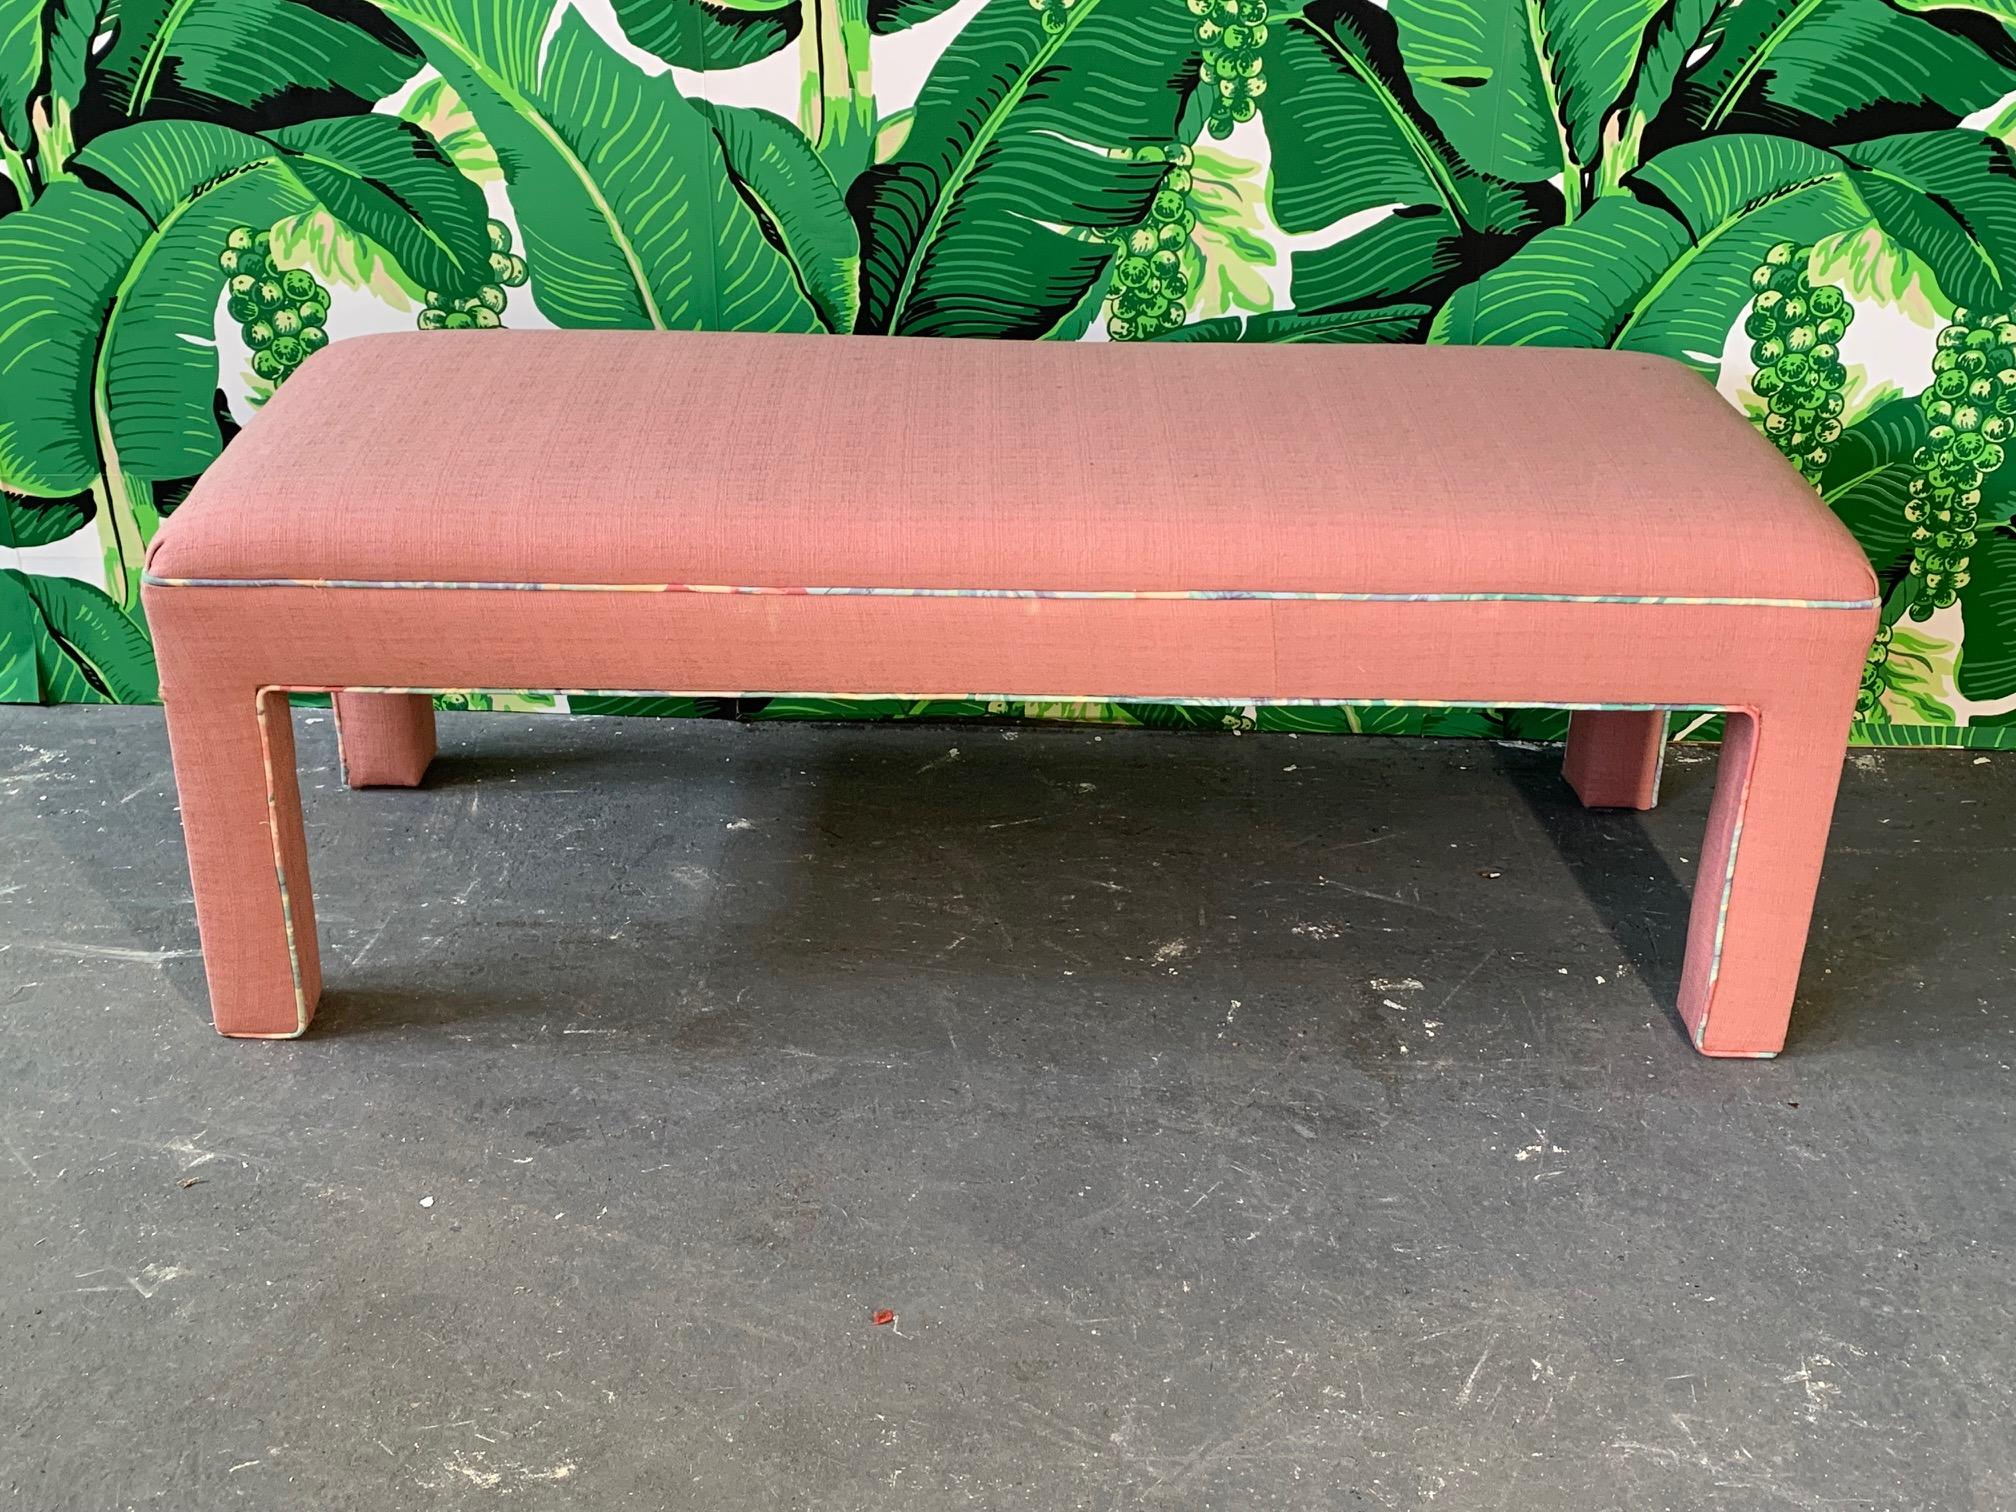 Upholstered bench or ottoman in true 1980s style. Pink with pastel tropical piping. Very good condition.